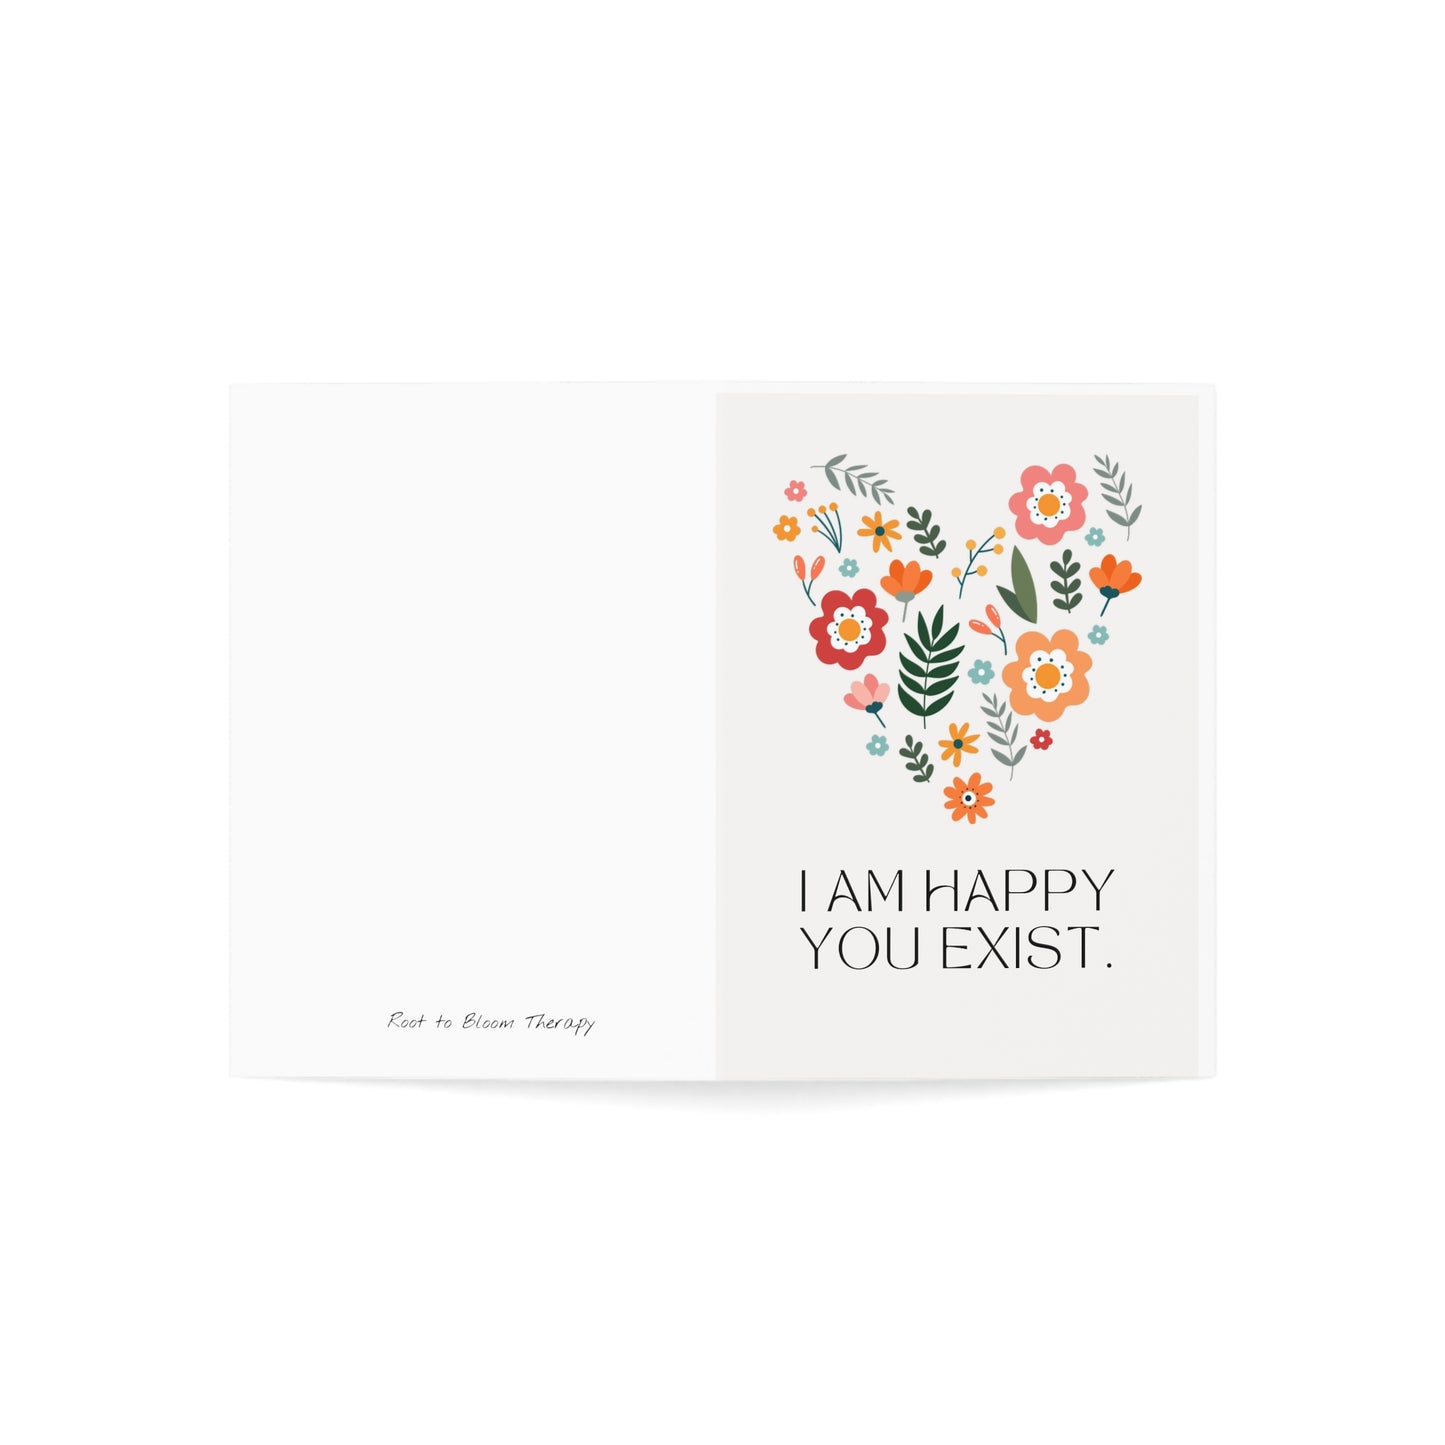 I am Happy You Exist- Greeting Cards (1, 10, 30, and 50pcs)